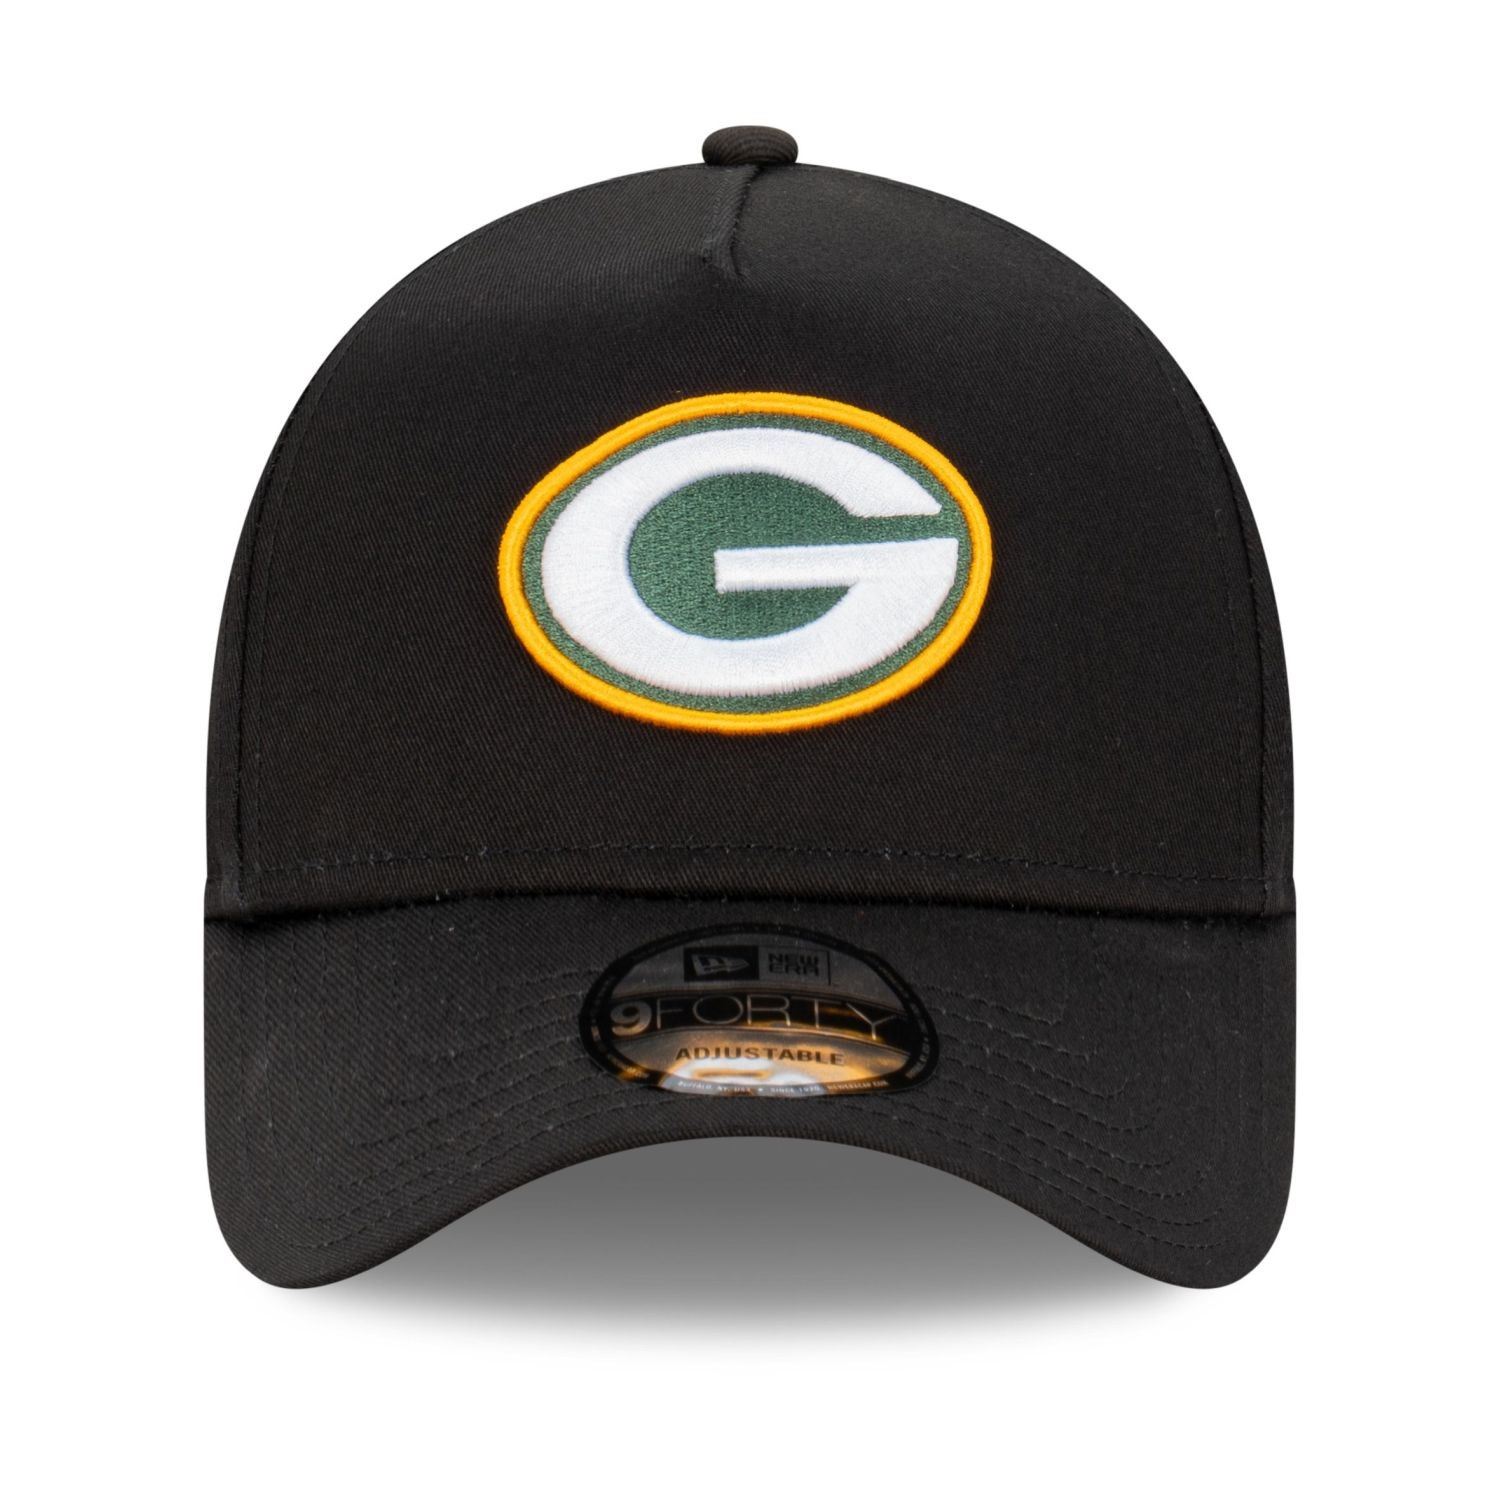 Green Bay Packers NFL Evergreen Black 9Forty Adjustable A-Frame Cap New Era